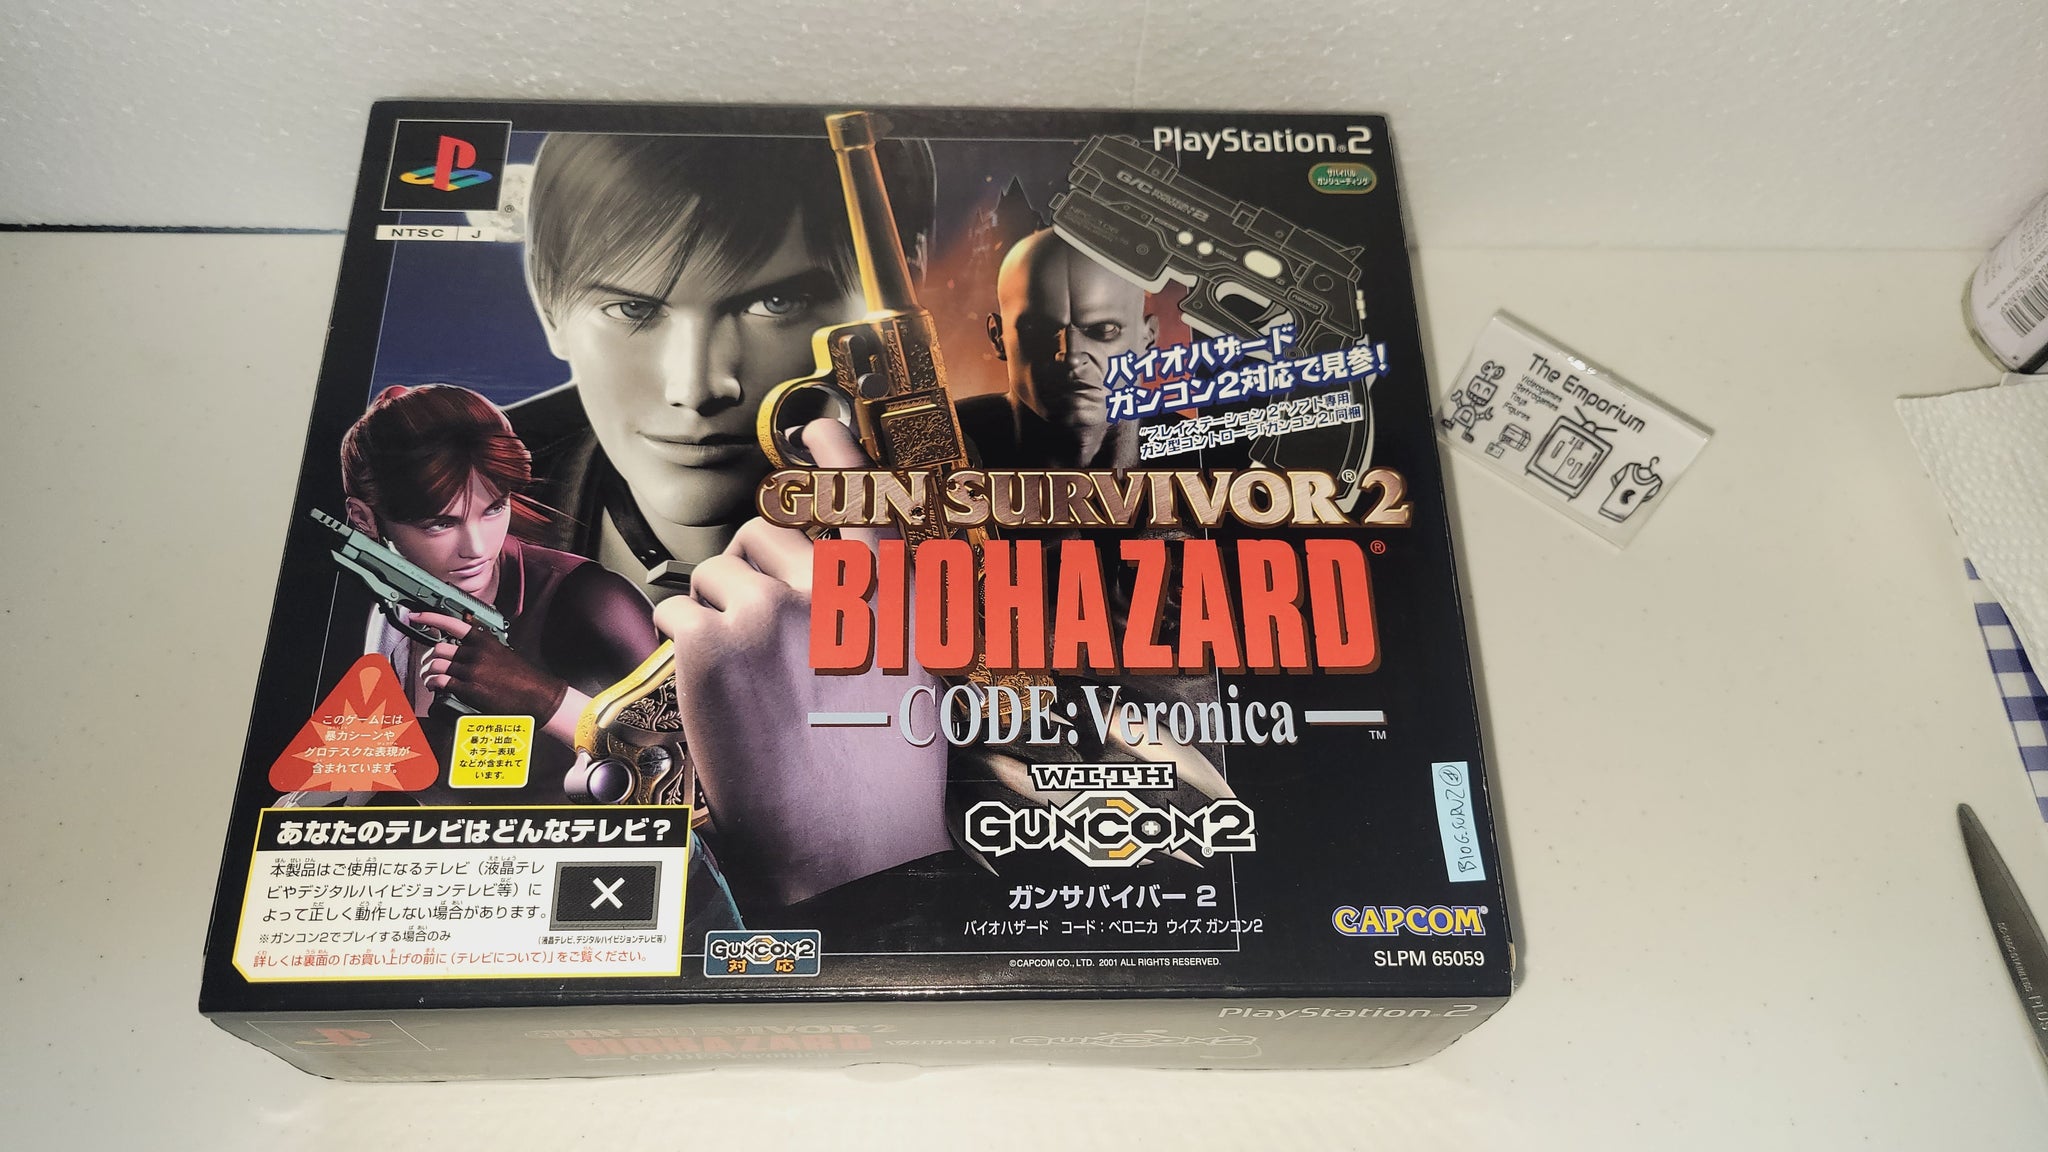 Resident Evil Code: Veronica X (Sony PlayStation 2, 2001) for sale